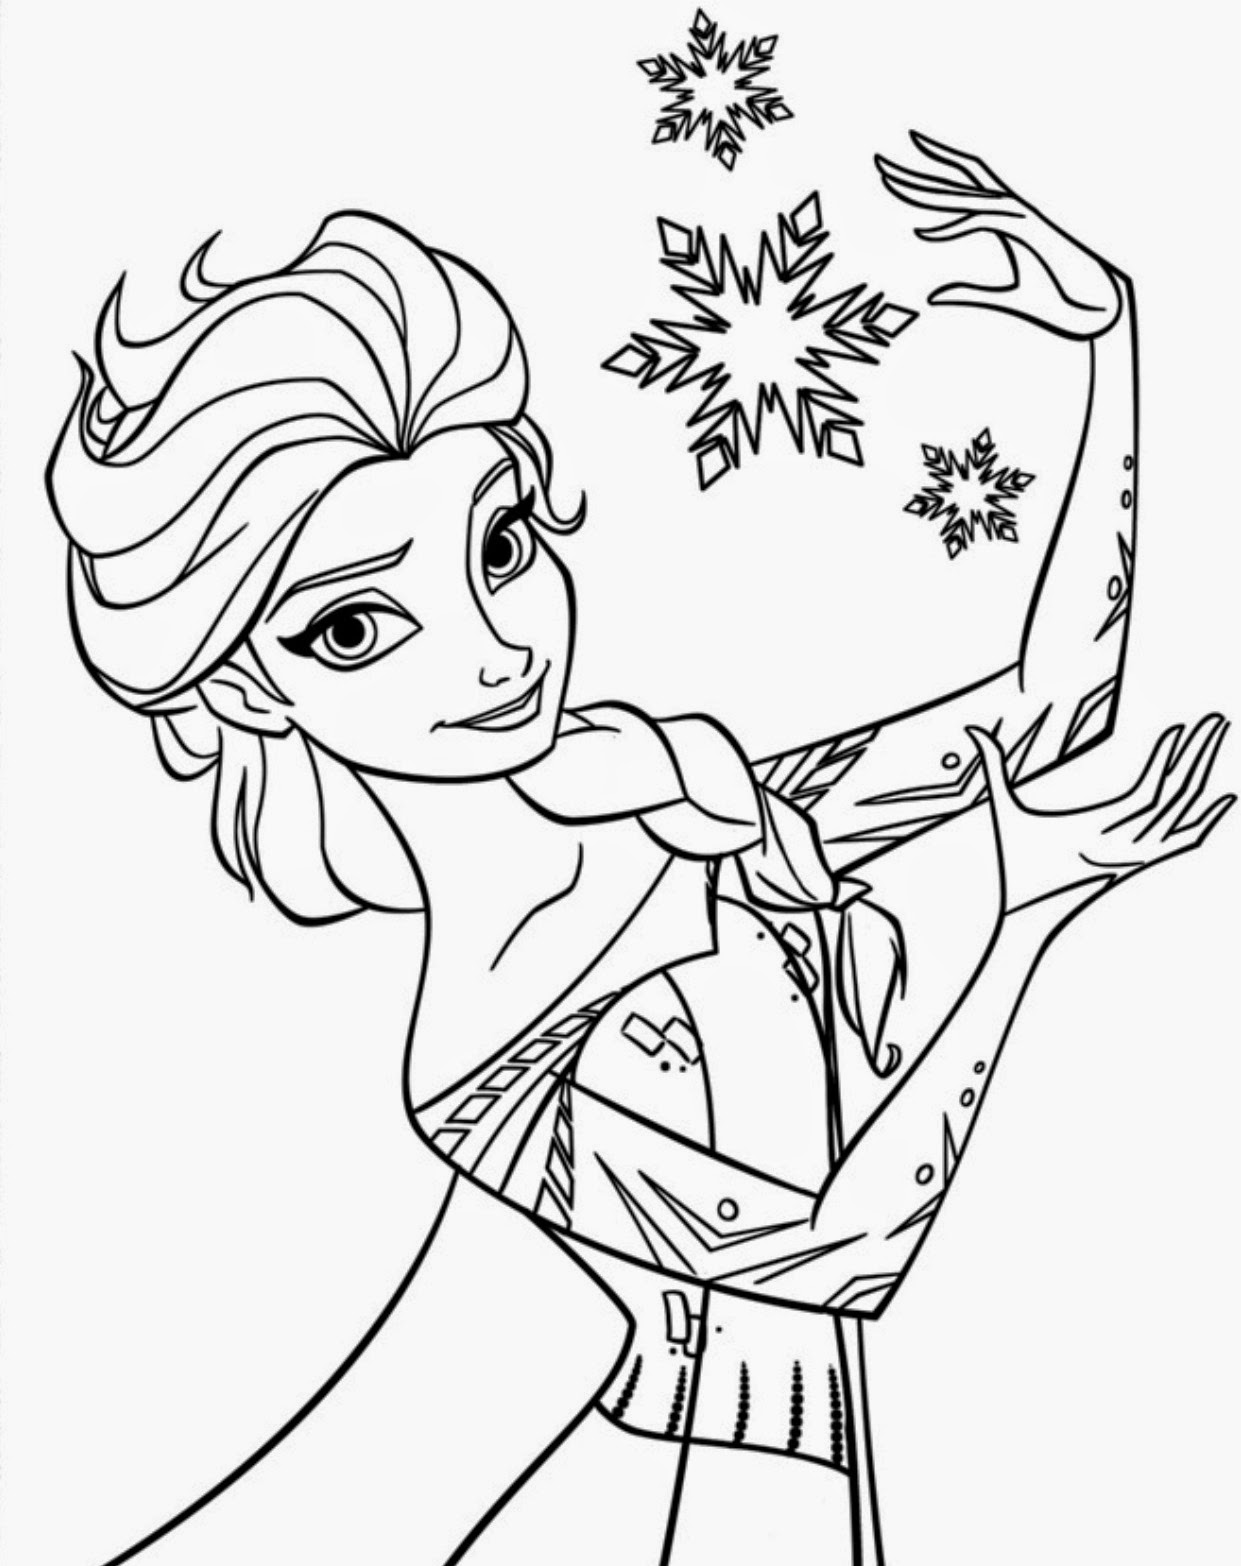 15 Beautiful Disney Frozen Coloring Pages Free ~ Instant 